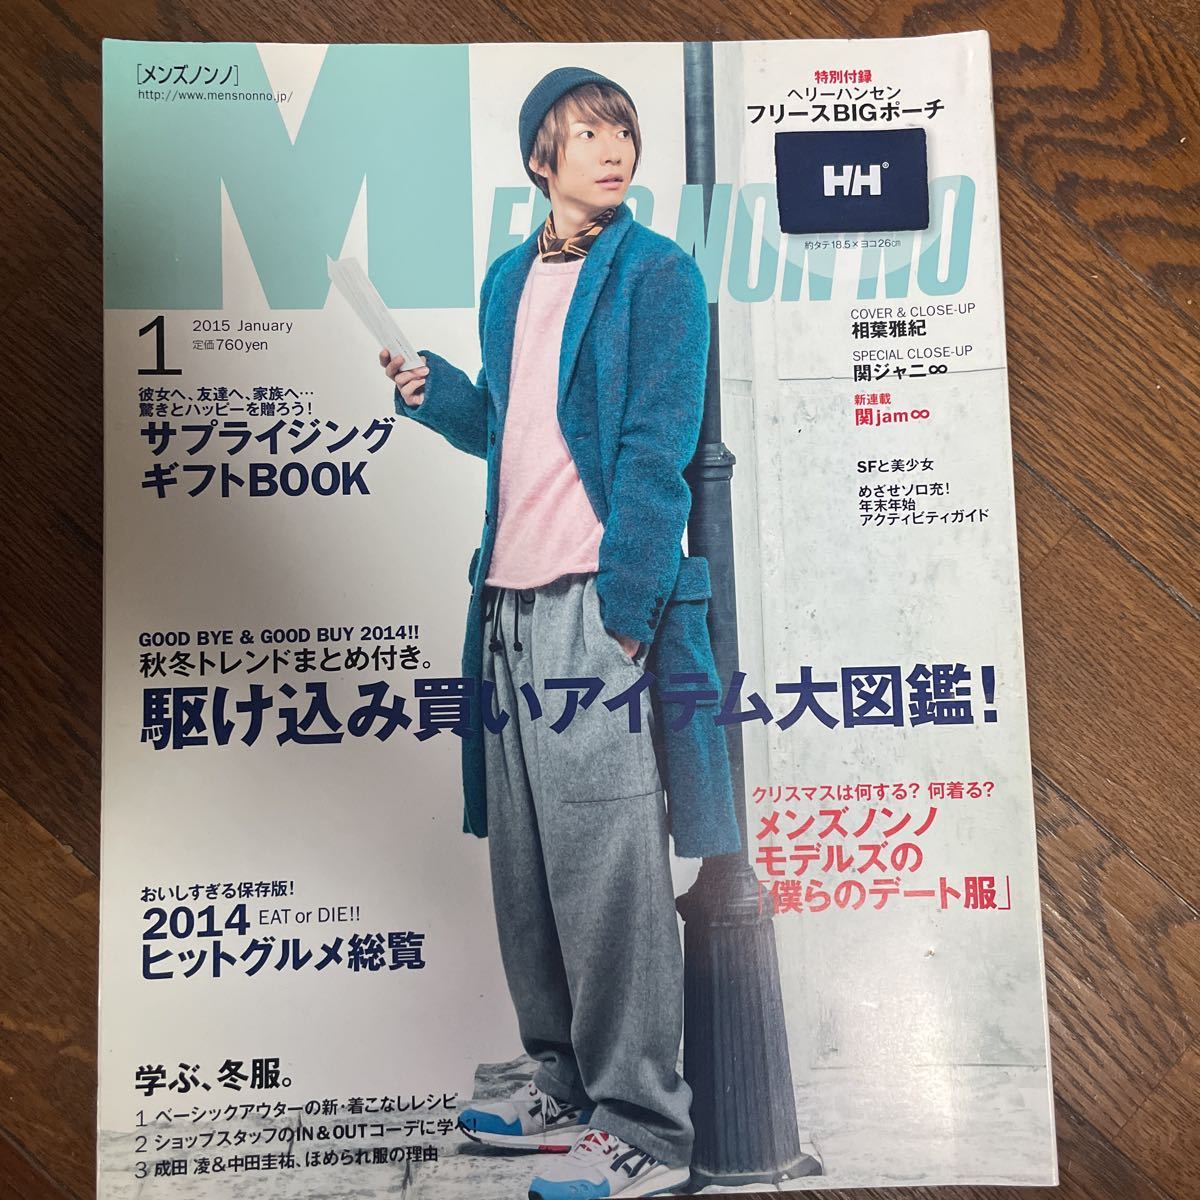 MEN'S NON-NO メンズノンノ2015年1月号【表紙 相葉雅紀】坂口健太郎 product details | Yahoo! Auctions  Japan proxy bidding and shopping service | FROM JAPAN